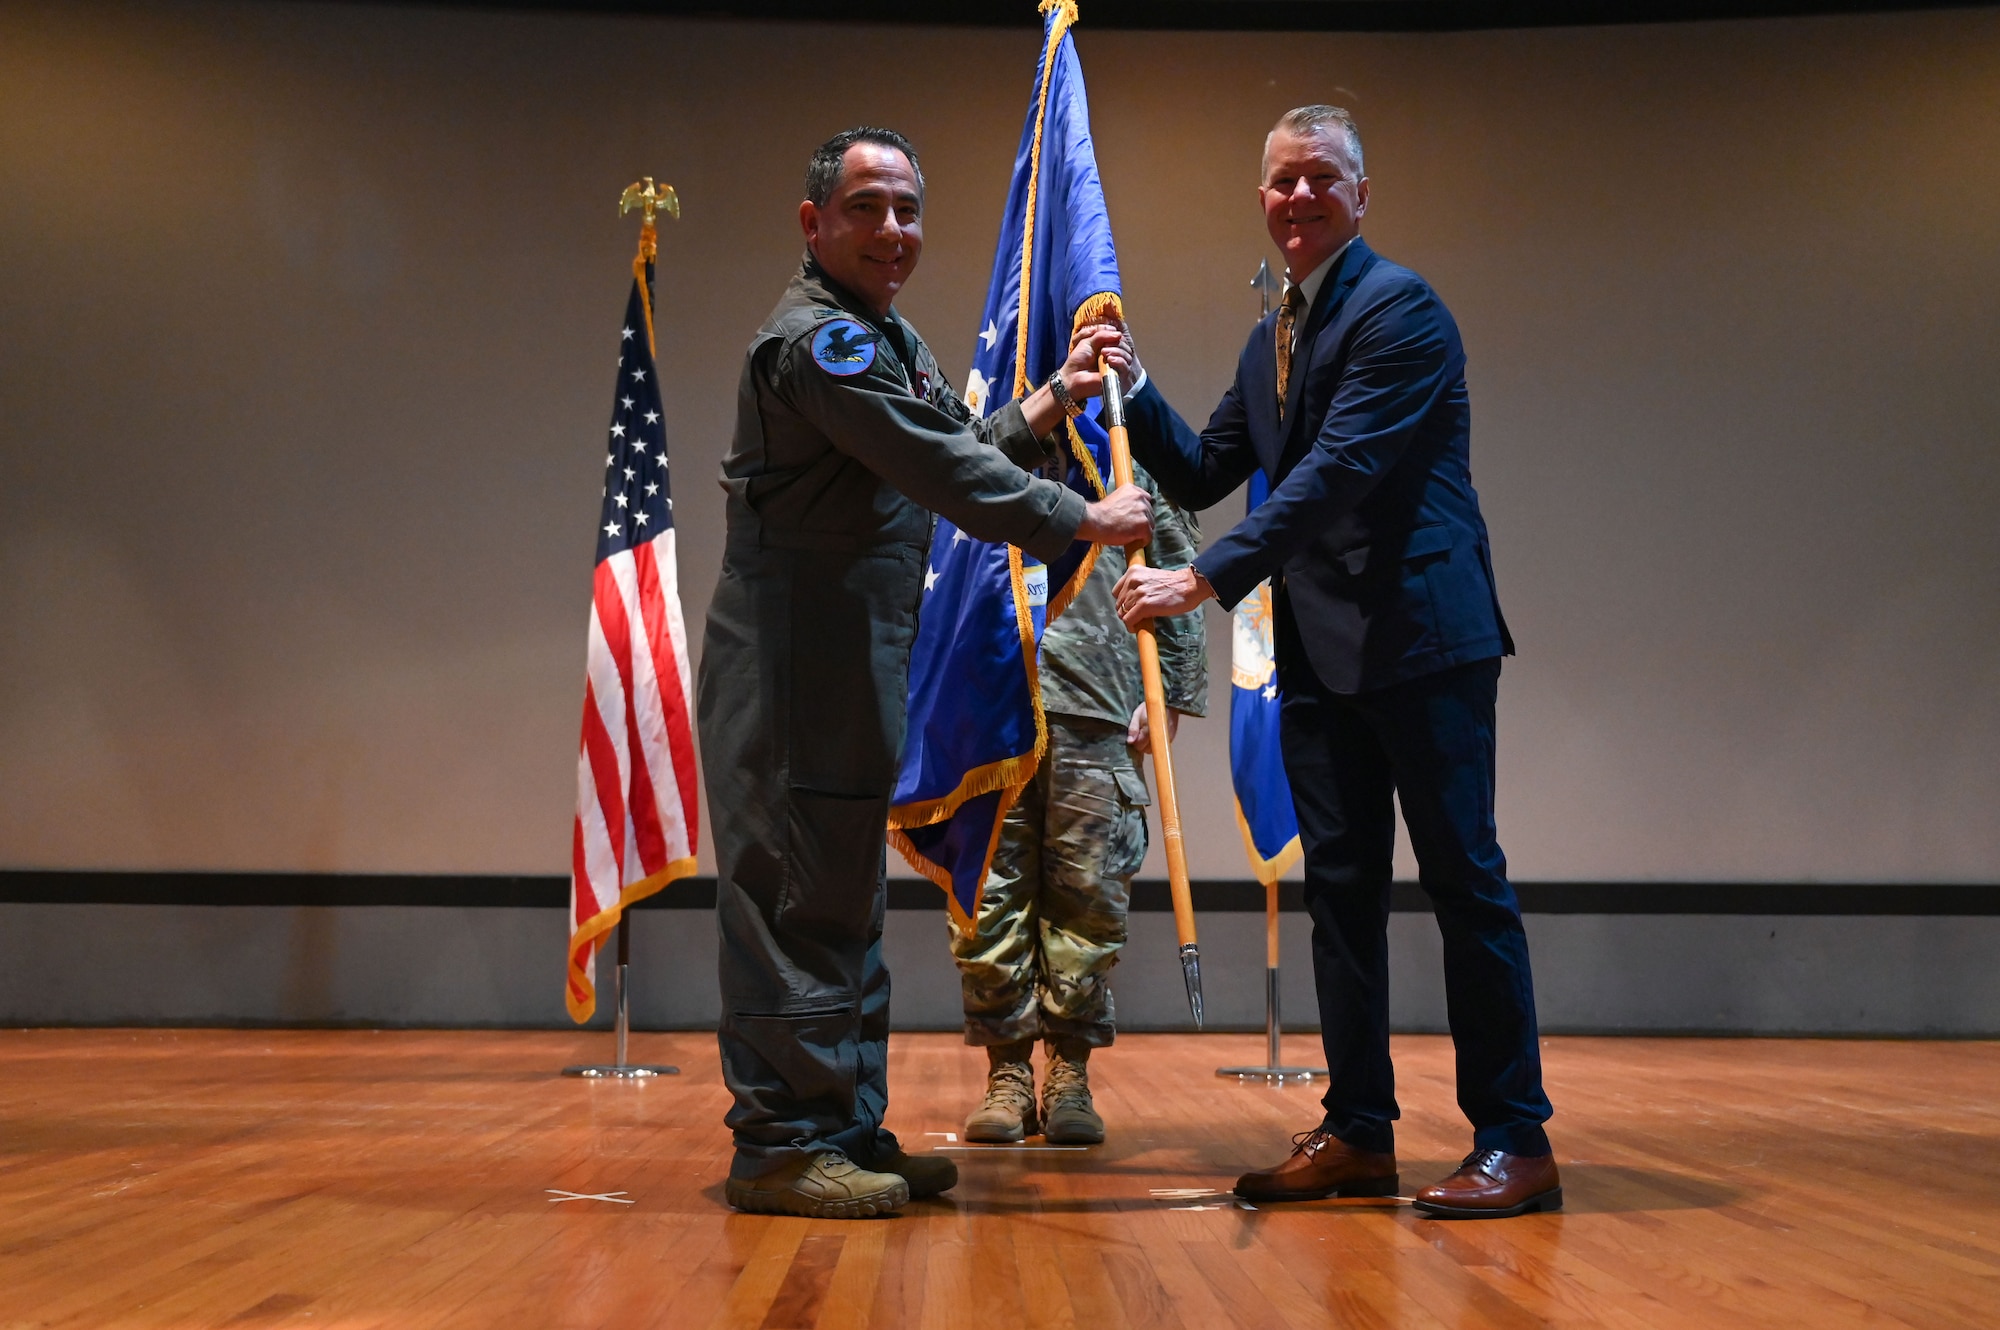 U.S. Air Force Col. Josh Koslov, 350th Spectrum Warfare wing commander, inducts Tim Mccool, co-founder and co-owner of 3rd Planet Brewery in Niceville and member of the Niceville Chamber of Commerce and the Northwest Florida State College Foundation Board, during the wing’s first Honorary Commander Induction ceremony, at Eglin Air Force Base, Fla., Dec. 1, 2023. Honorary Commanders serve as the liaison between the 350th SWW and the surrounding community by maintaining strong relations through mutually beneficial professional partnership. (U.S. Air Force photo by Staff Sgt. Ericka A. Woolever)